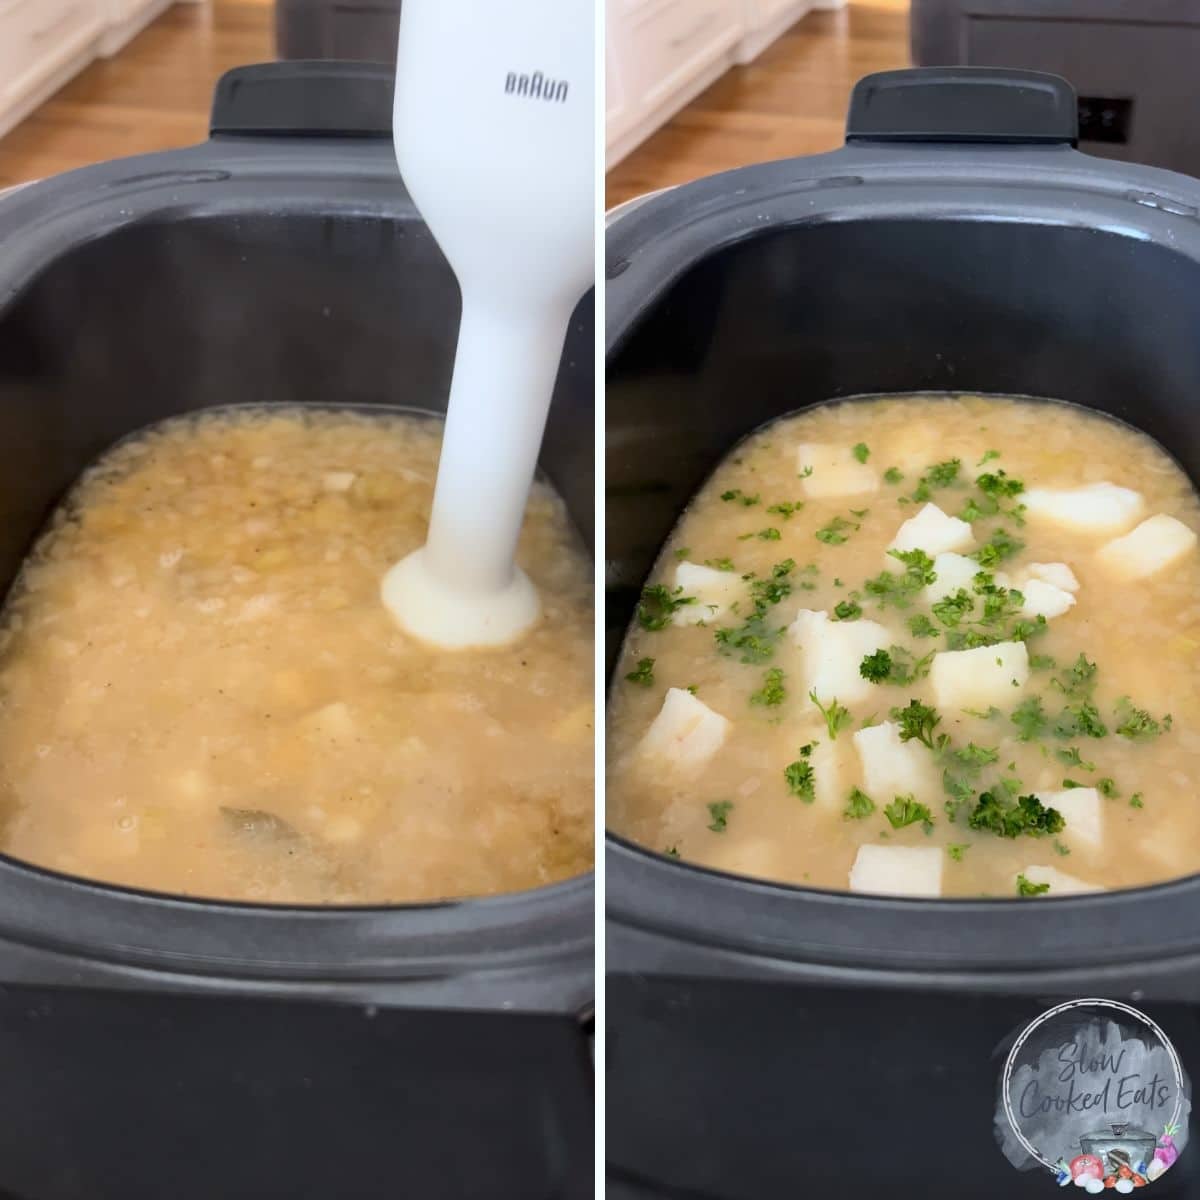 Blending the crock pot fish chowder using an immersion blender then adding the fish.